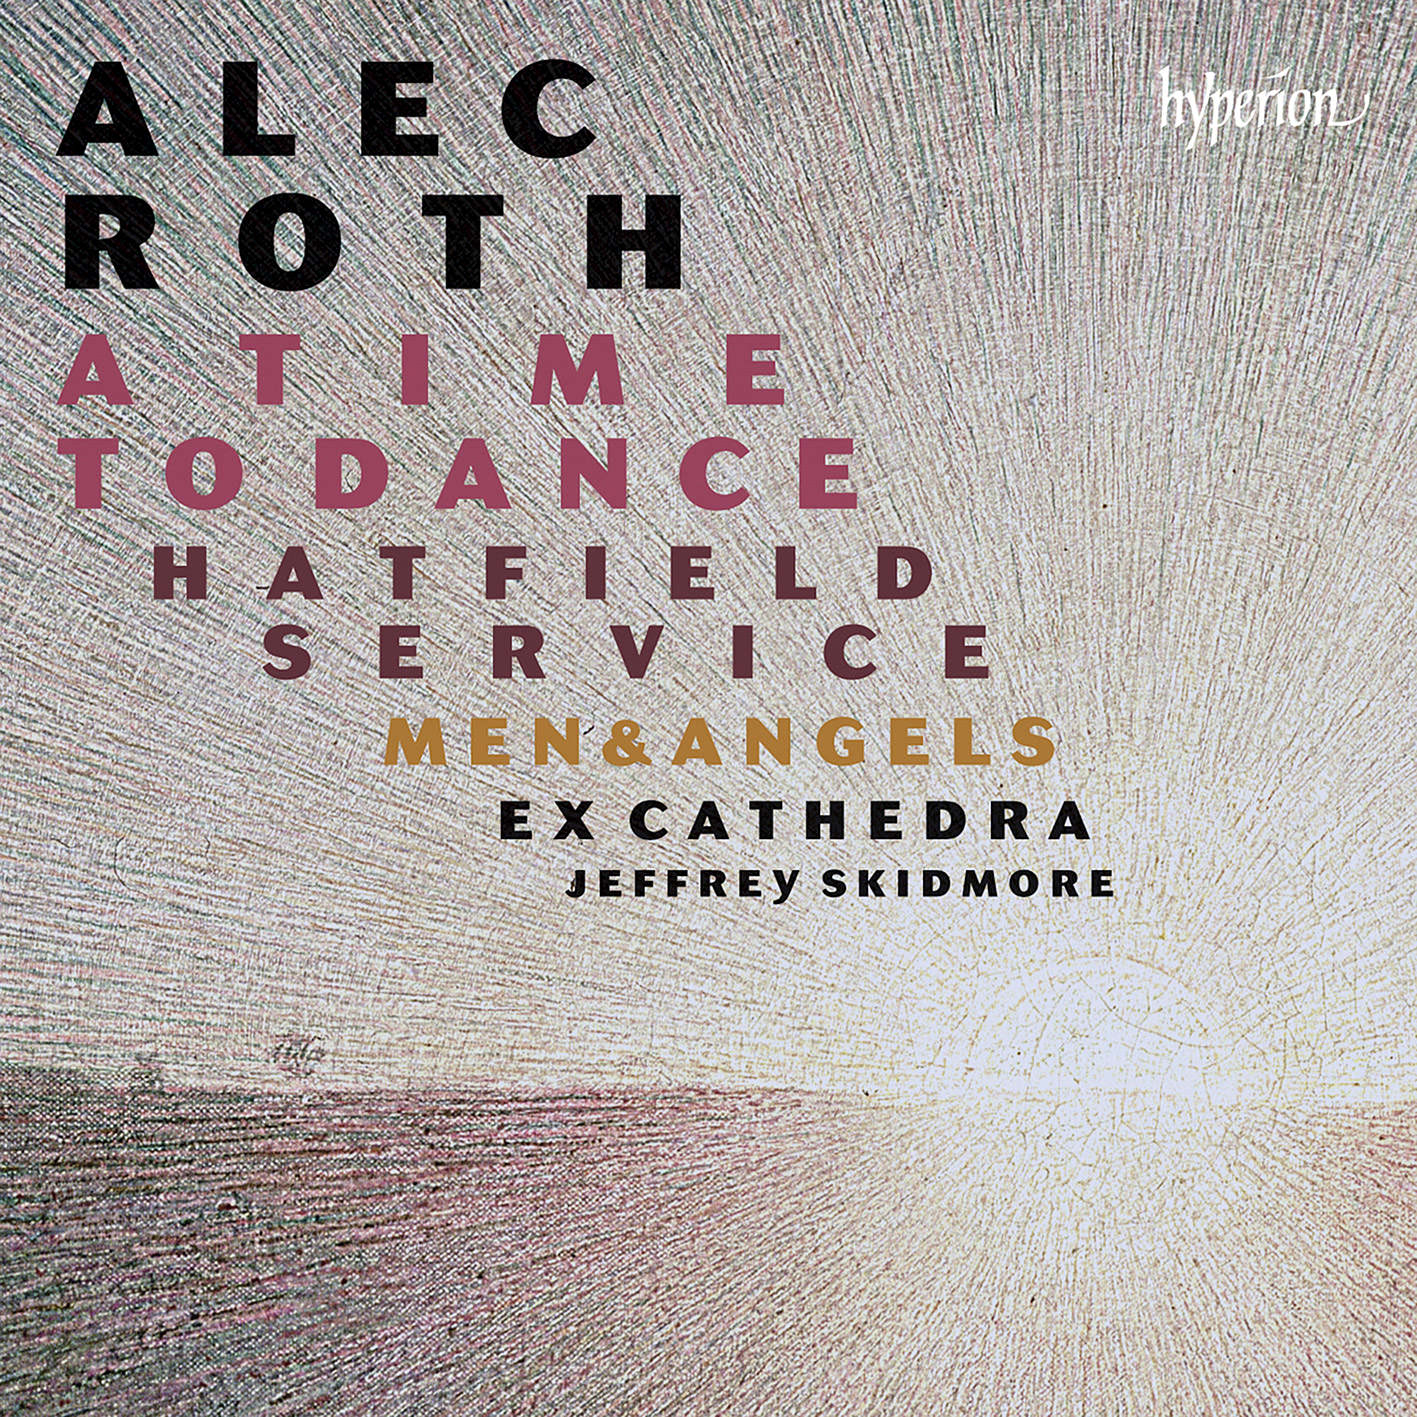 Ex Cathedra, Jeffrey Skidmore – Roth: A Time to Dance & Other choral works (2016) [Official Digital Download 24bit/44,1kHz]